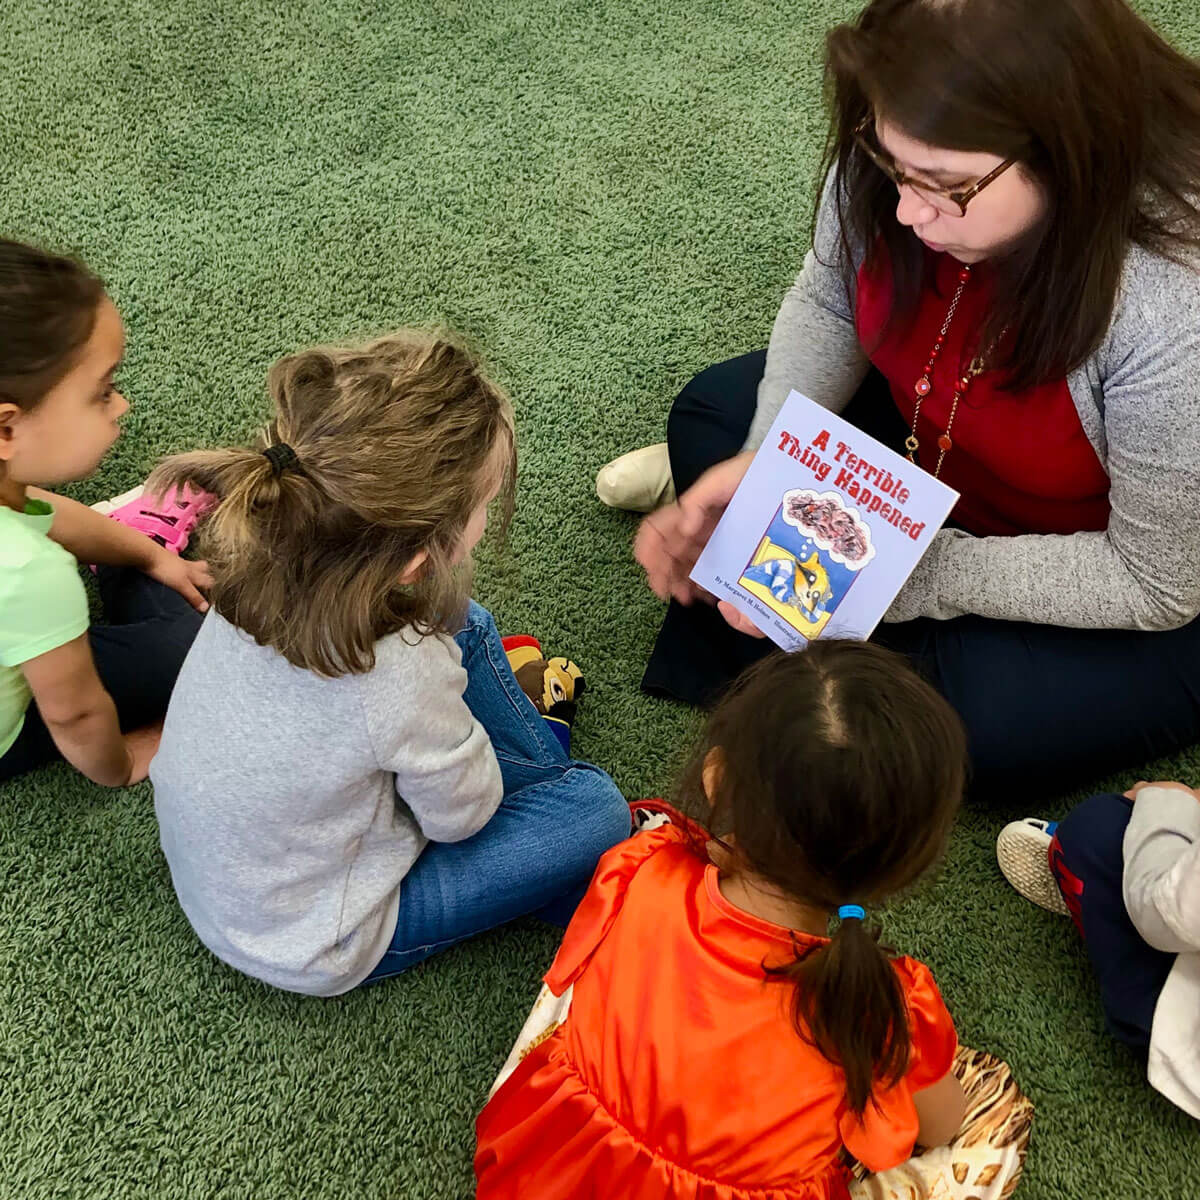 Childcare provider reading to a group of children.